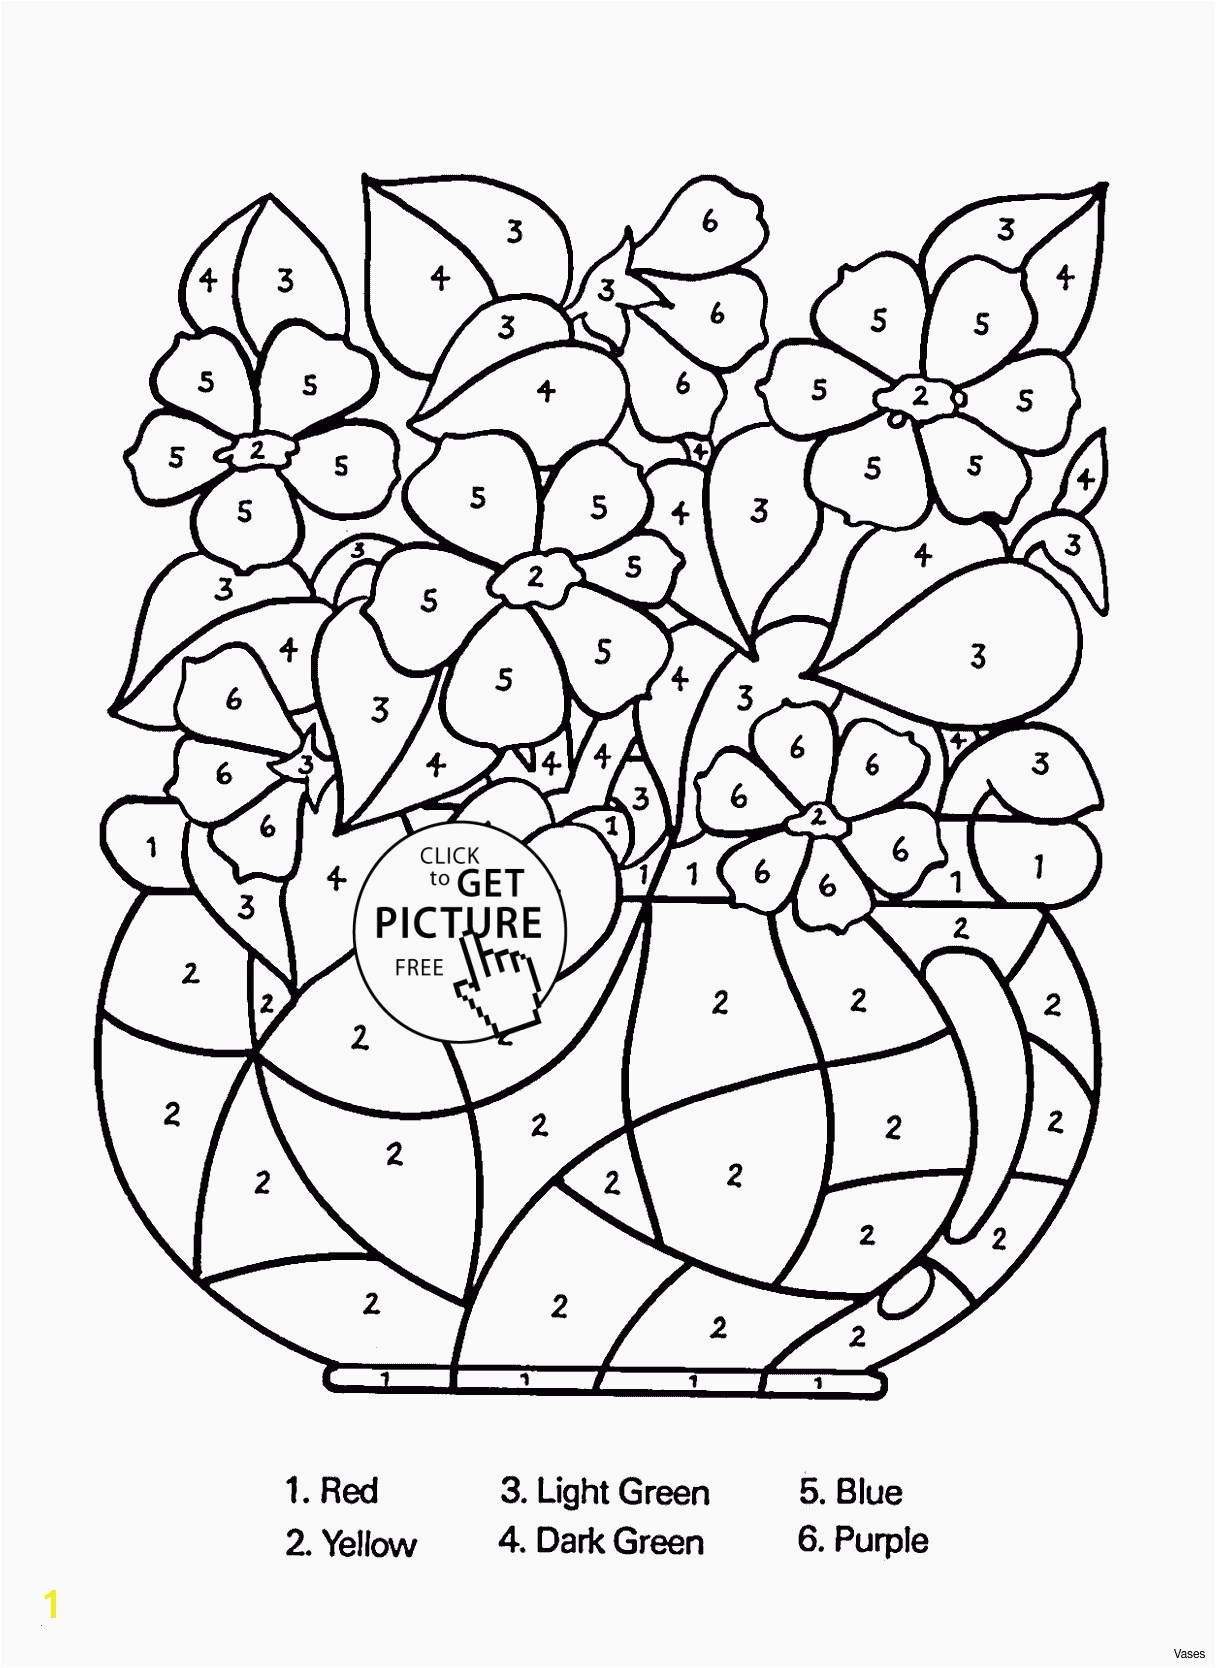 Flower Coloring Pages Pdf Flower Coloring Sheets Coloring Chrsistmas